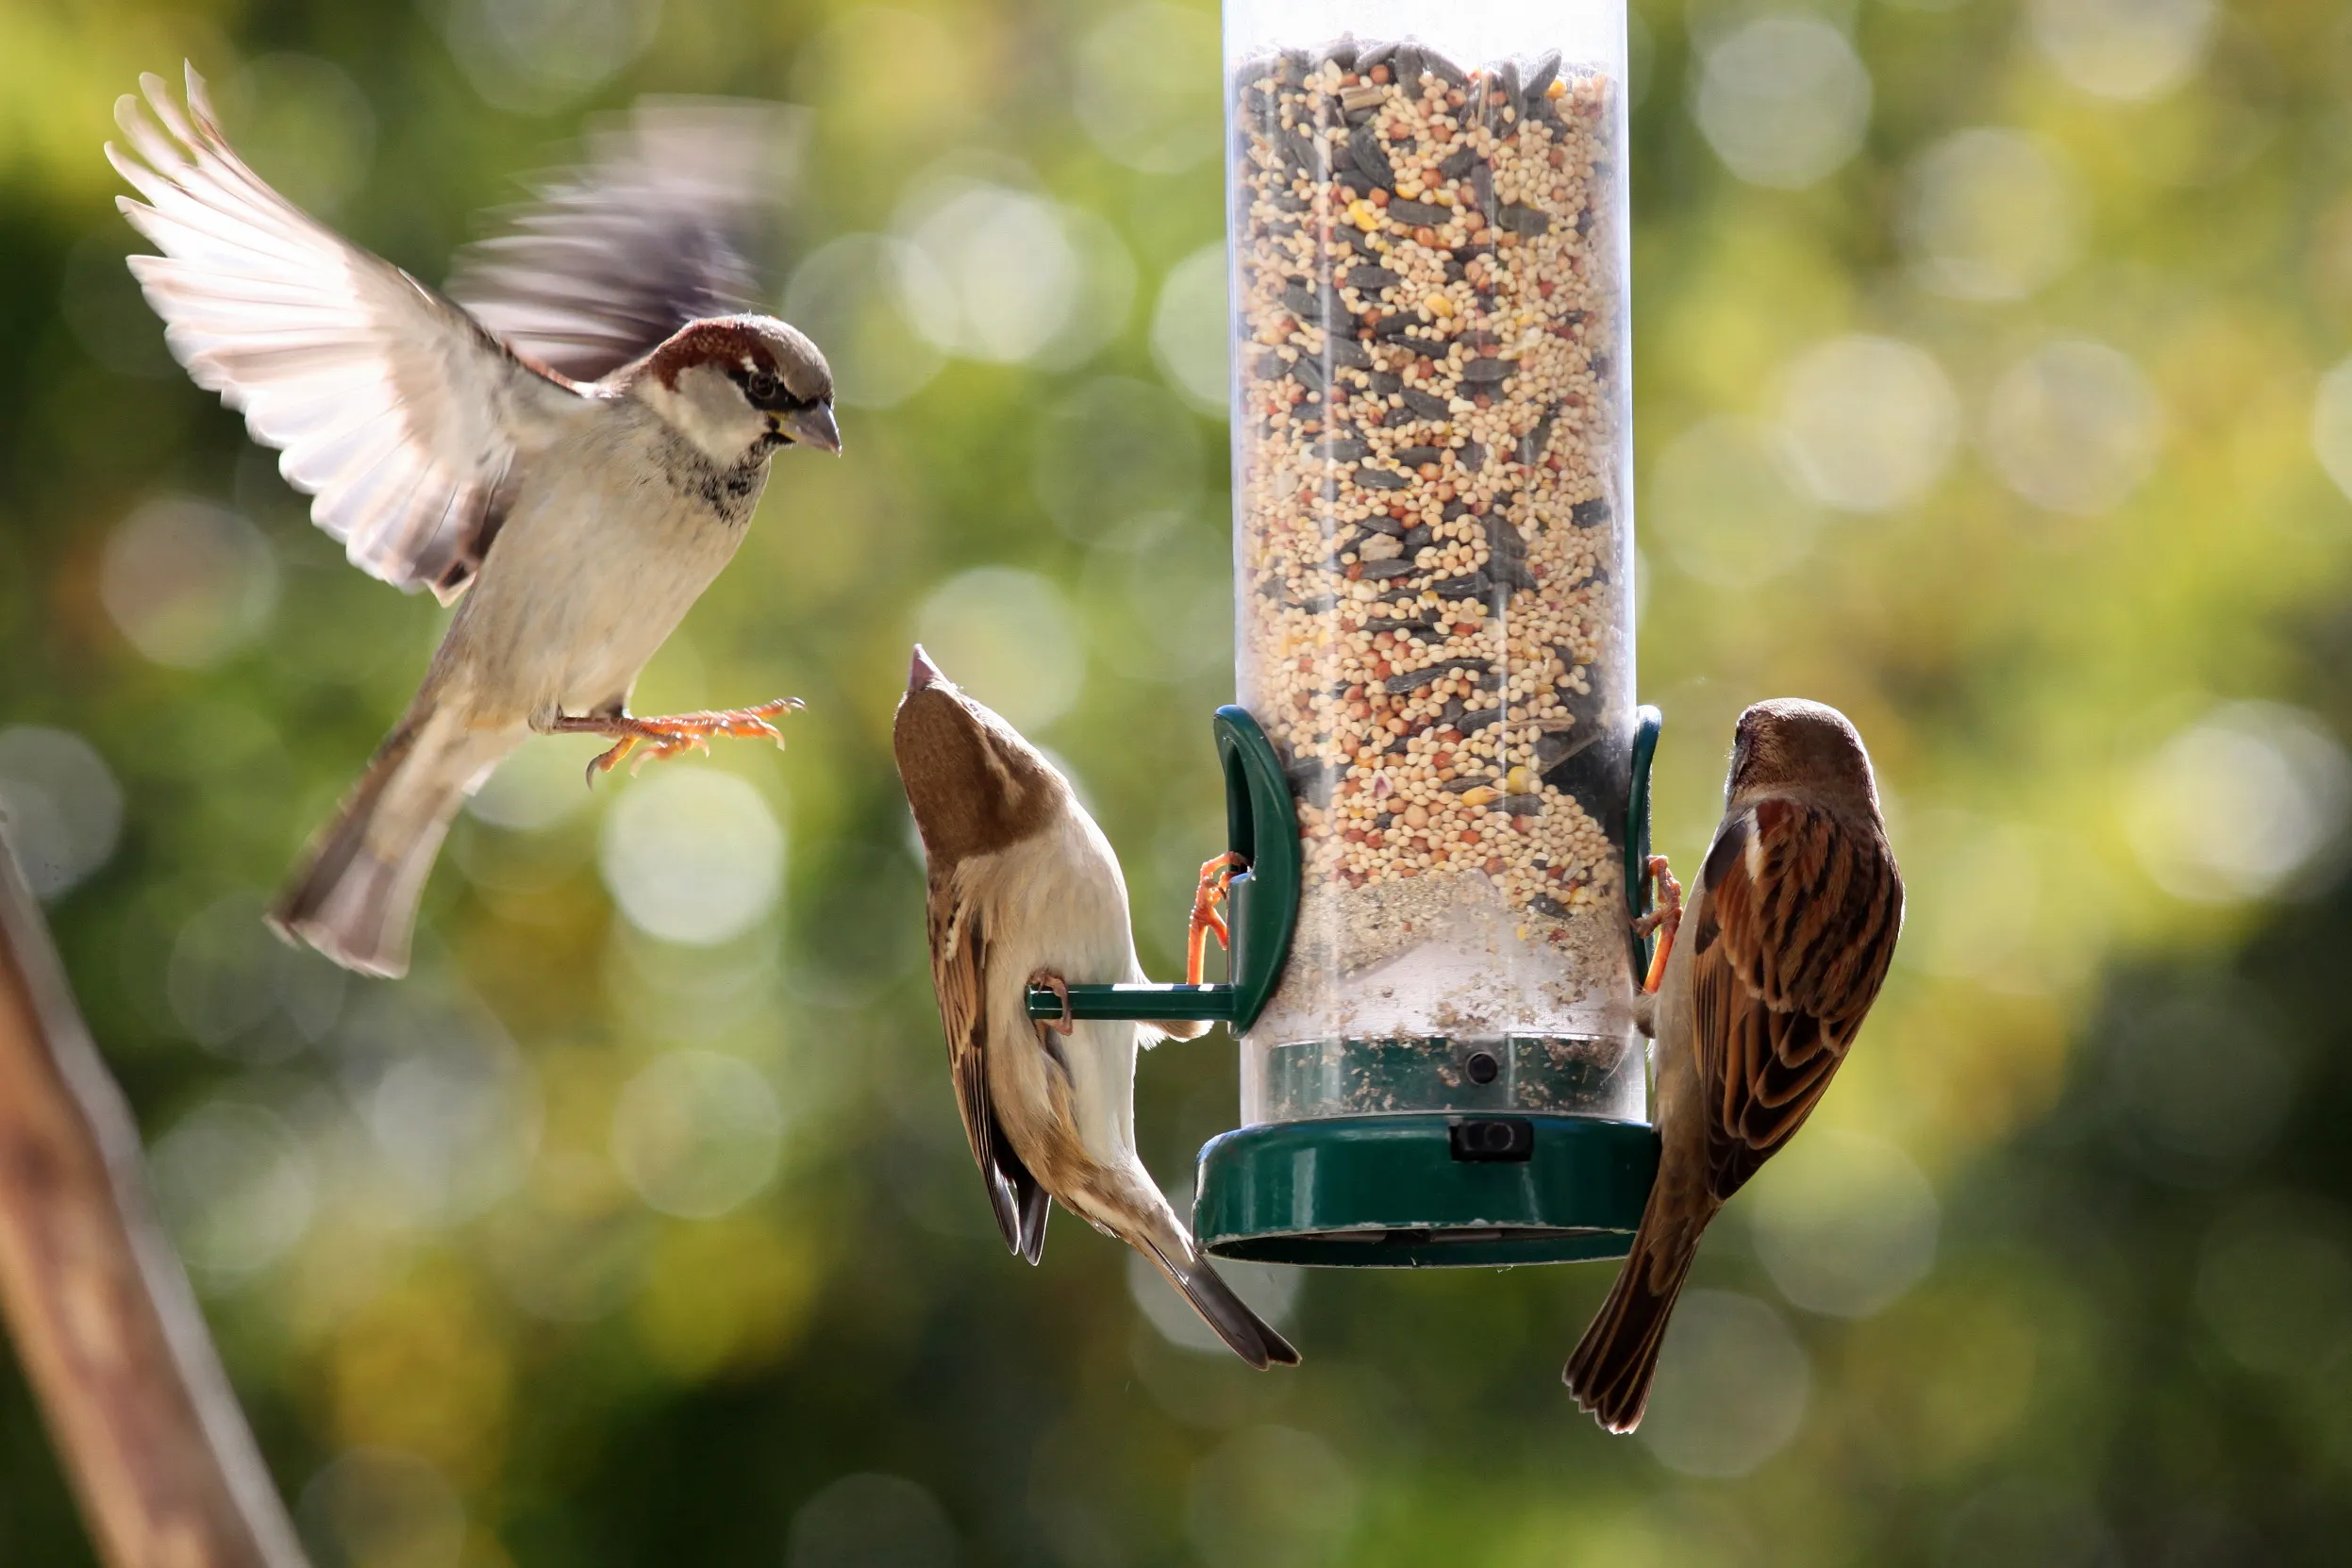 A group of three House Sparrows feeding off of a domestic birdfeeder.